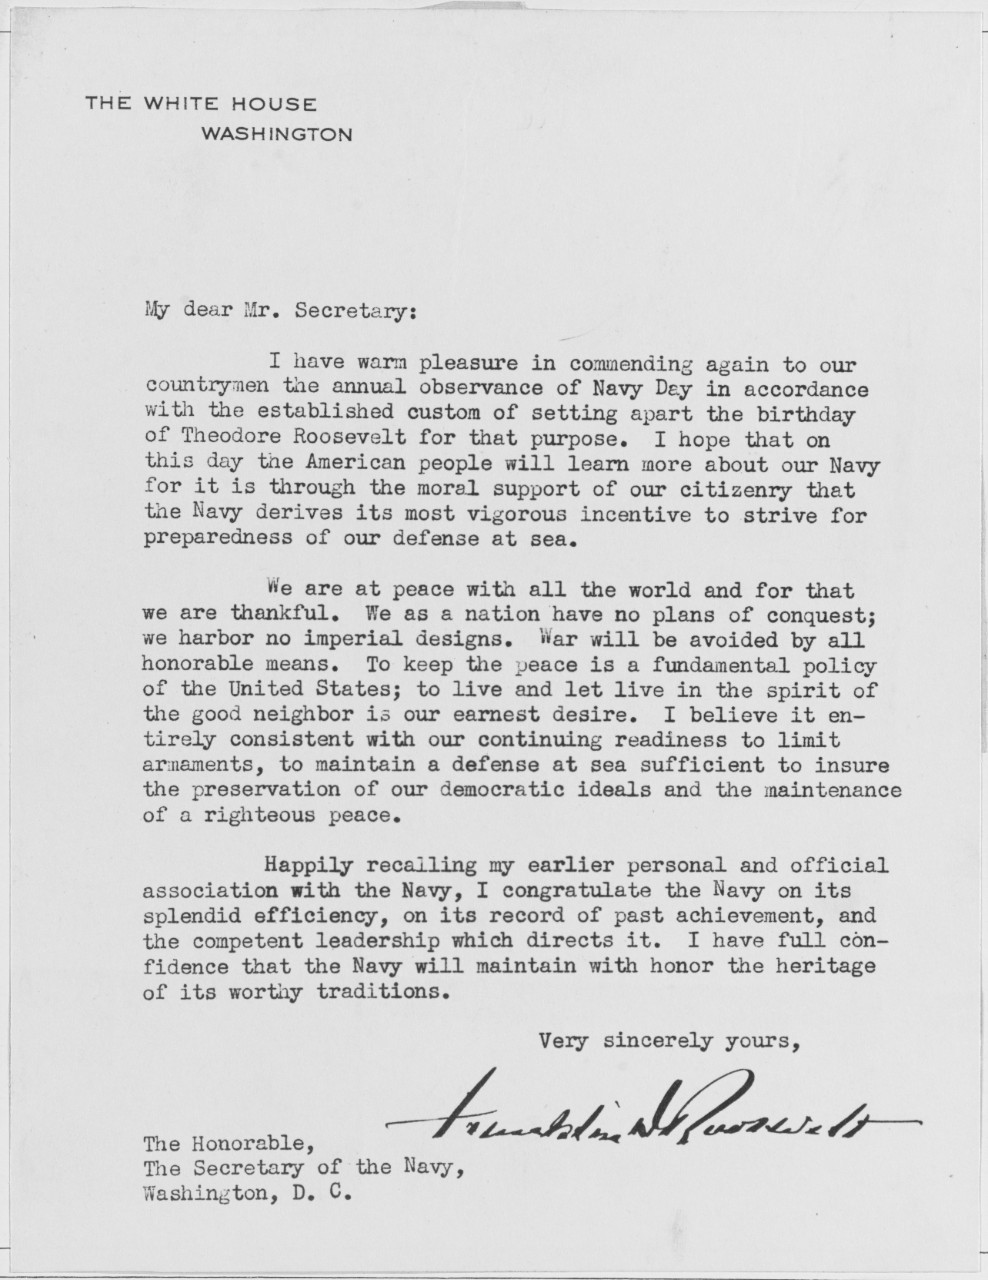 Letter from Franklin D. Roosevelt to Claude Swanson, 1937